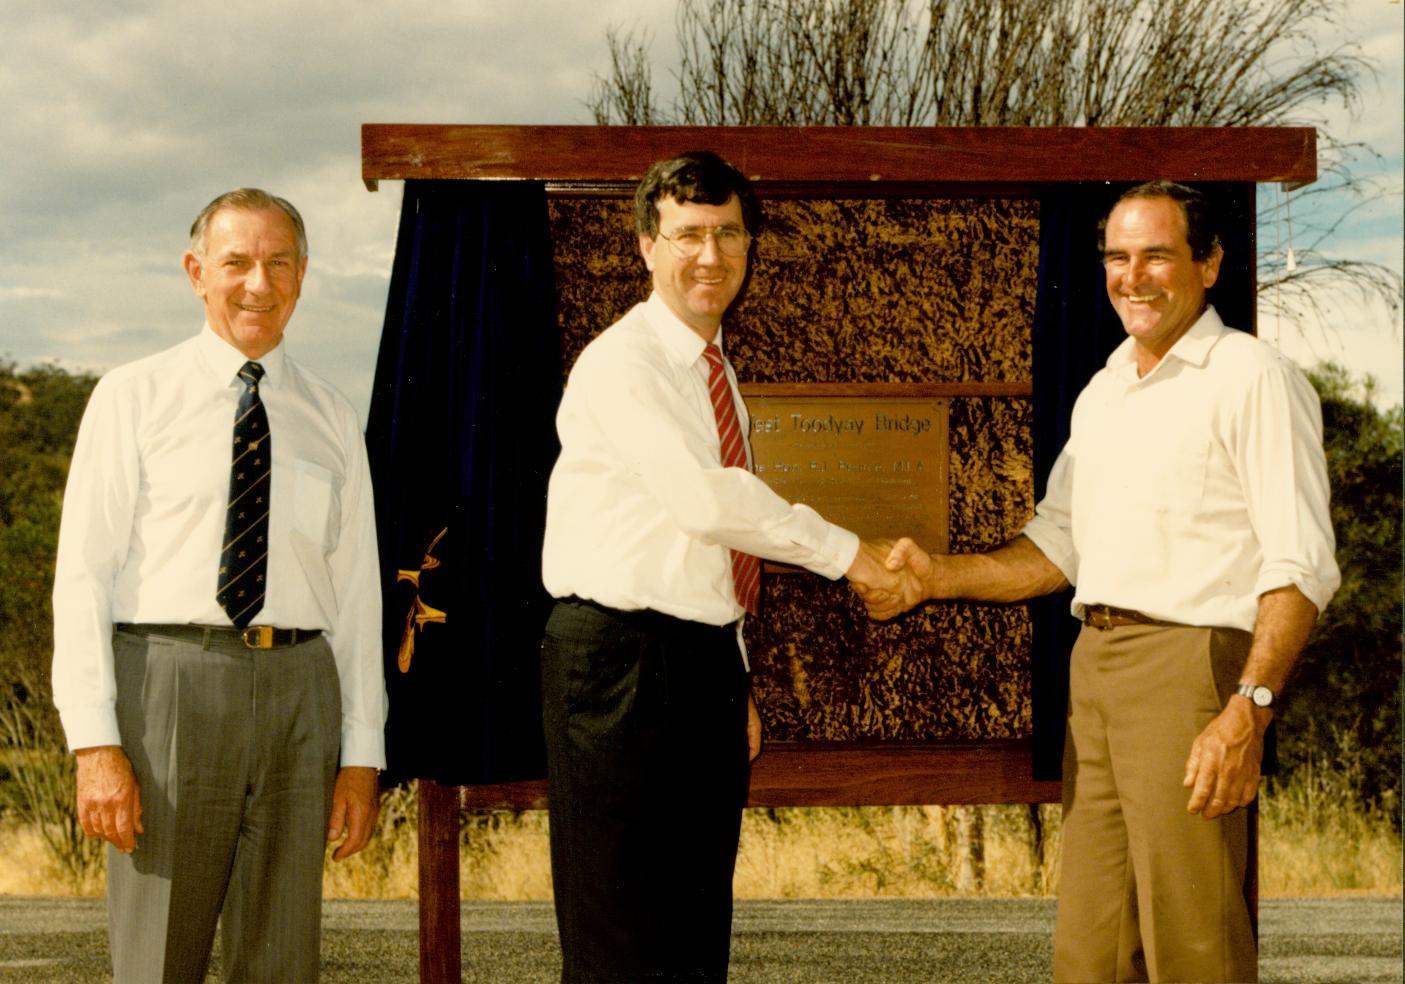 West Toodyay bridge re-opening 1988, official opening